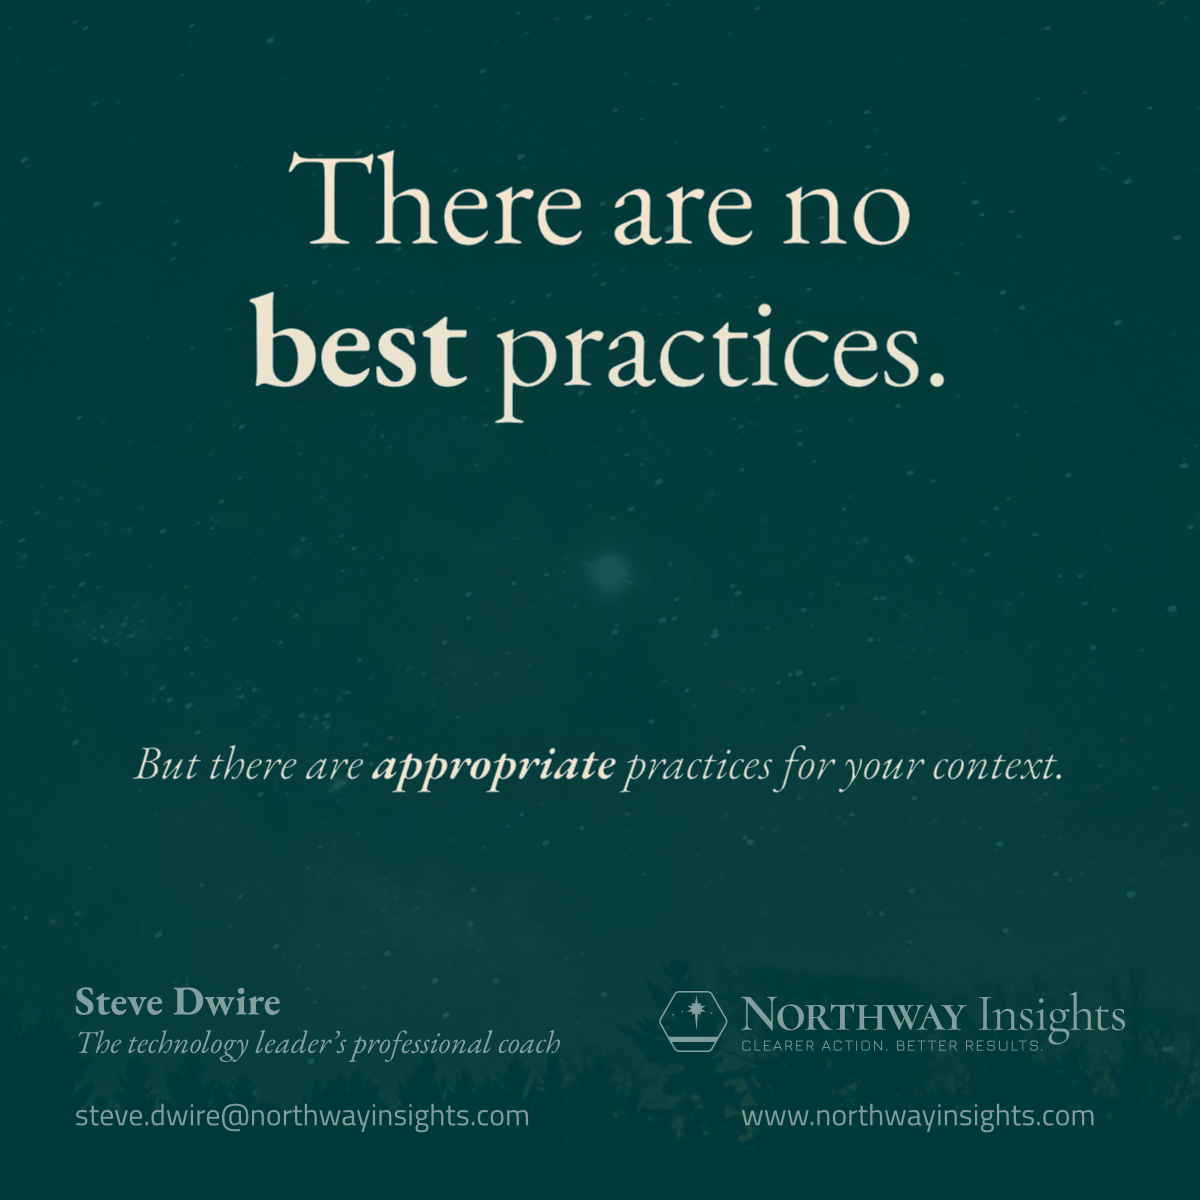 There are no best practices